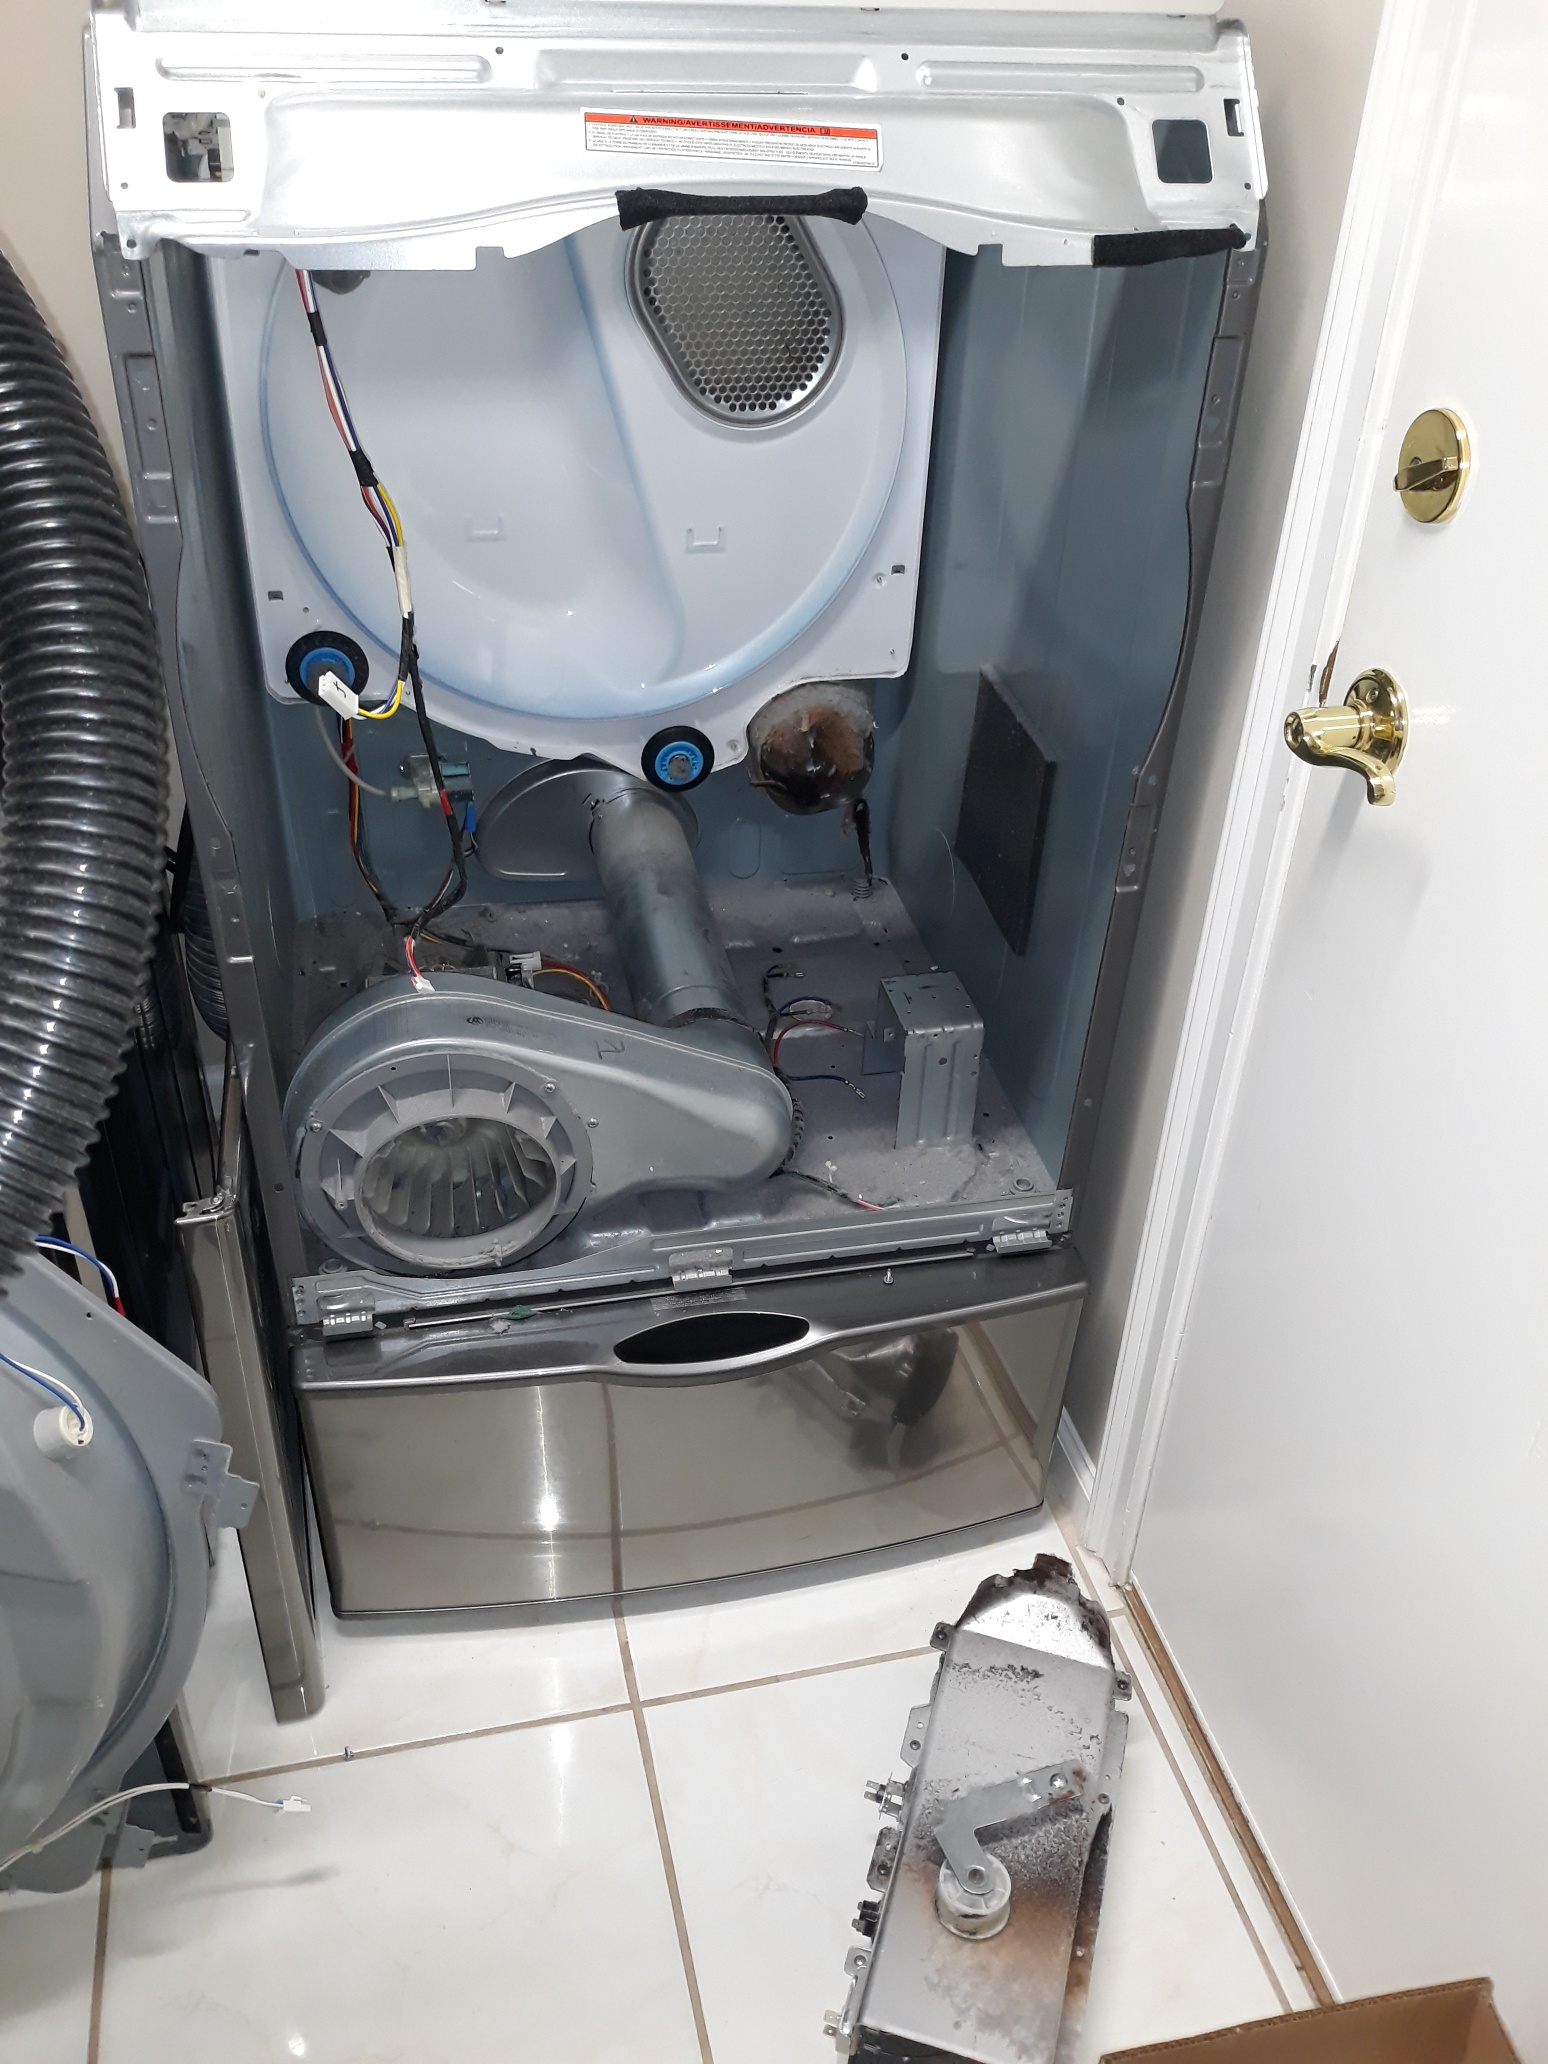 appliance repair dryer repair bad heating element and worn and seized idler pulley assembly nana avenue sky lake orlando fl 32809